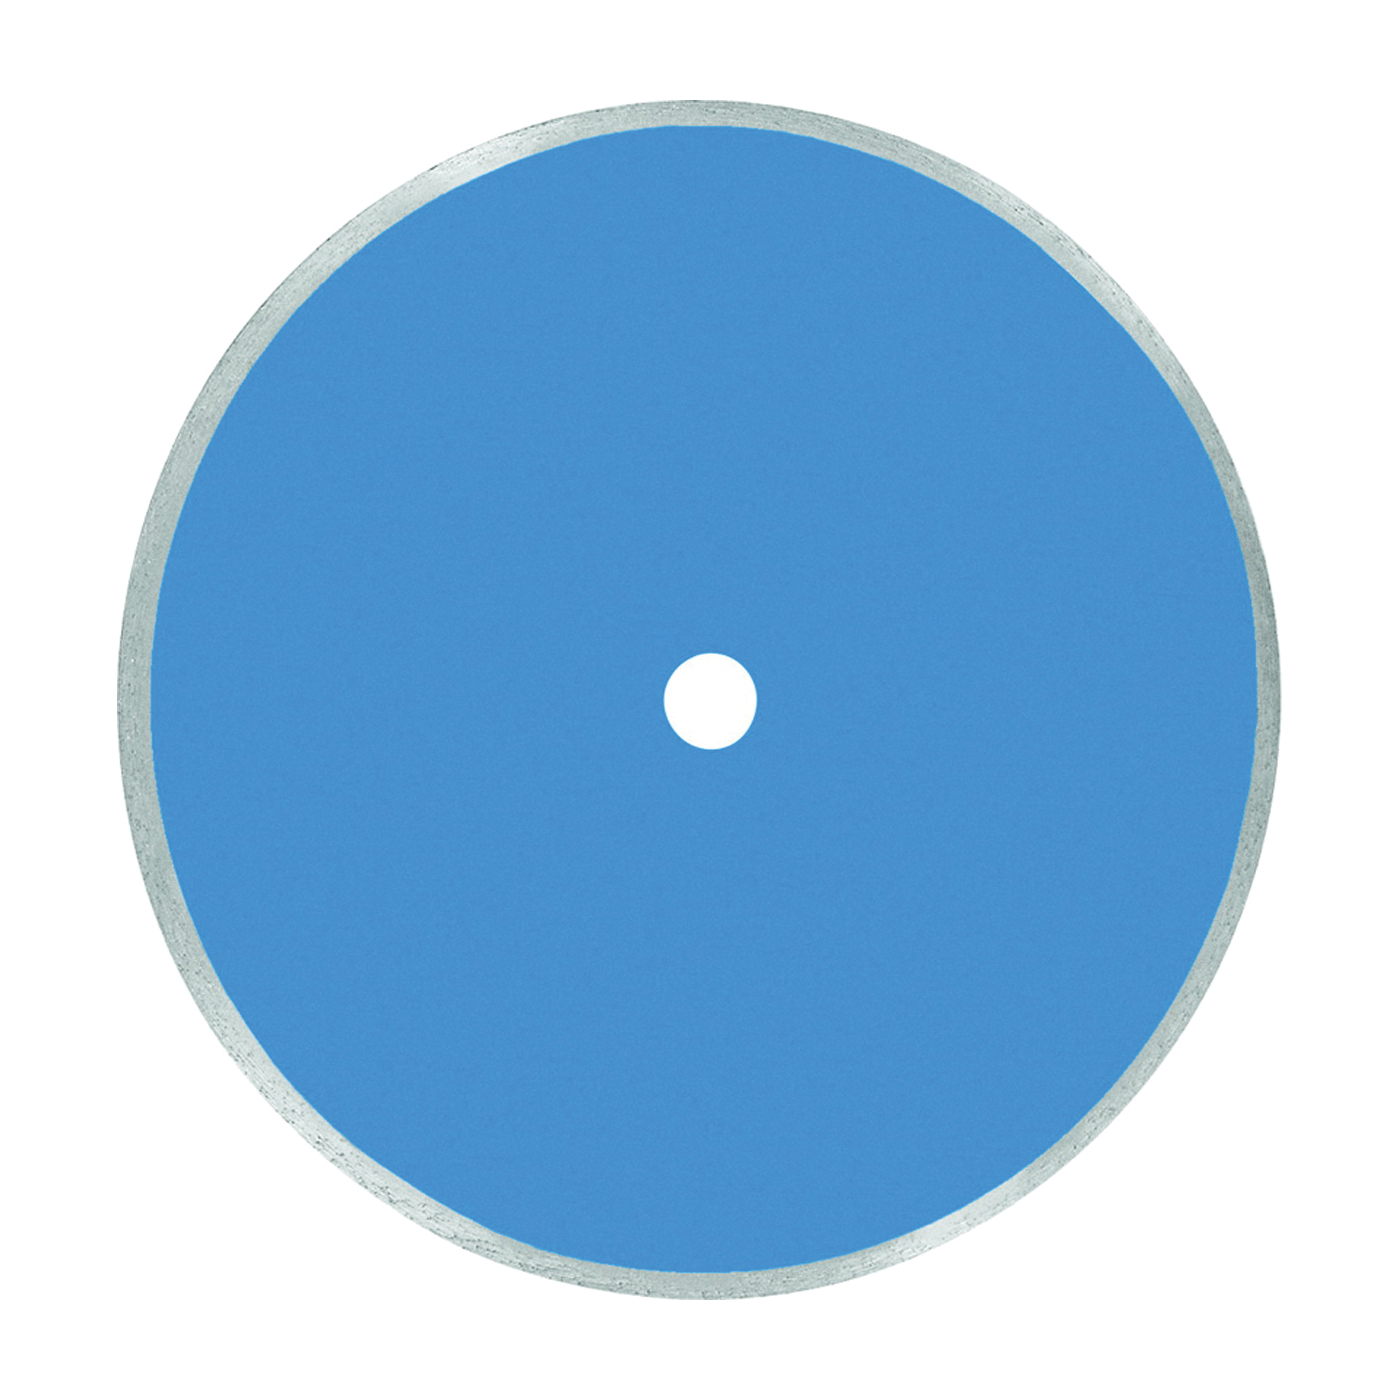 80015 Circular Saw Blade, 8 in Dia, 5/8 in Arbor, Applicable Materials: Tile